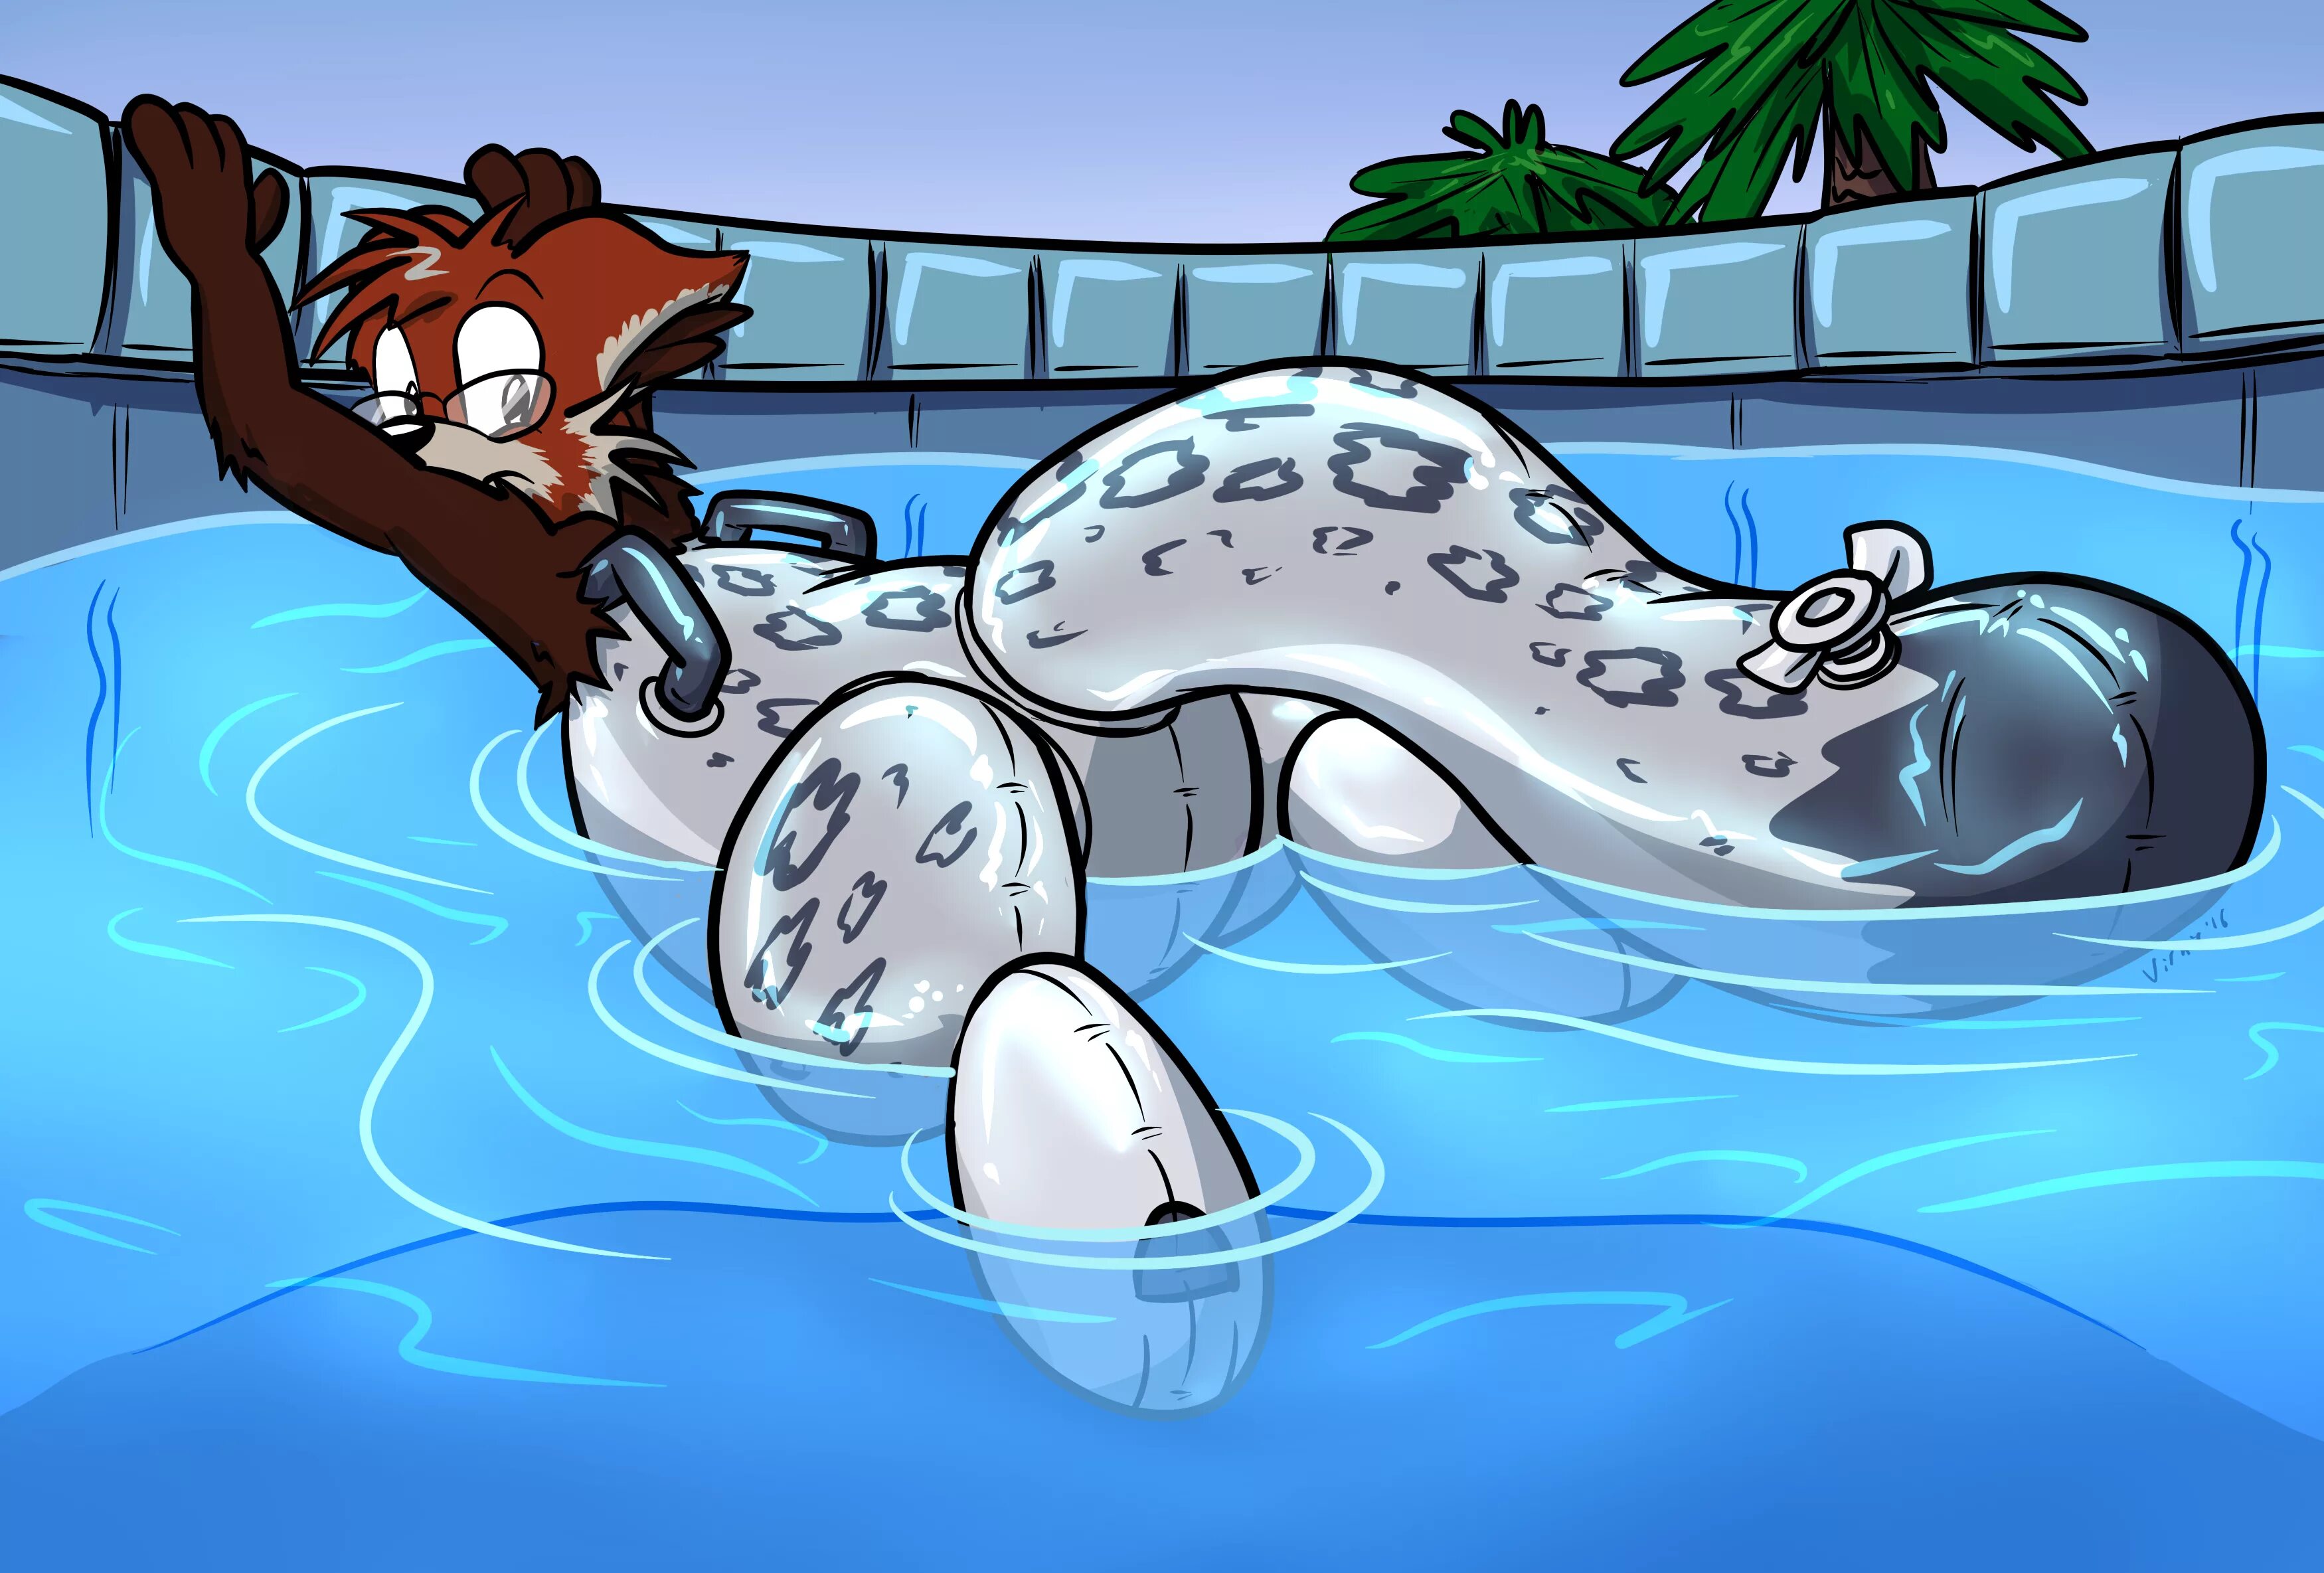 Chastity furry. Furry pooltoy TF. Inflatable TF. Inflatable TF pooltoy. Inflatable фури Pool Transformation.